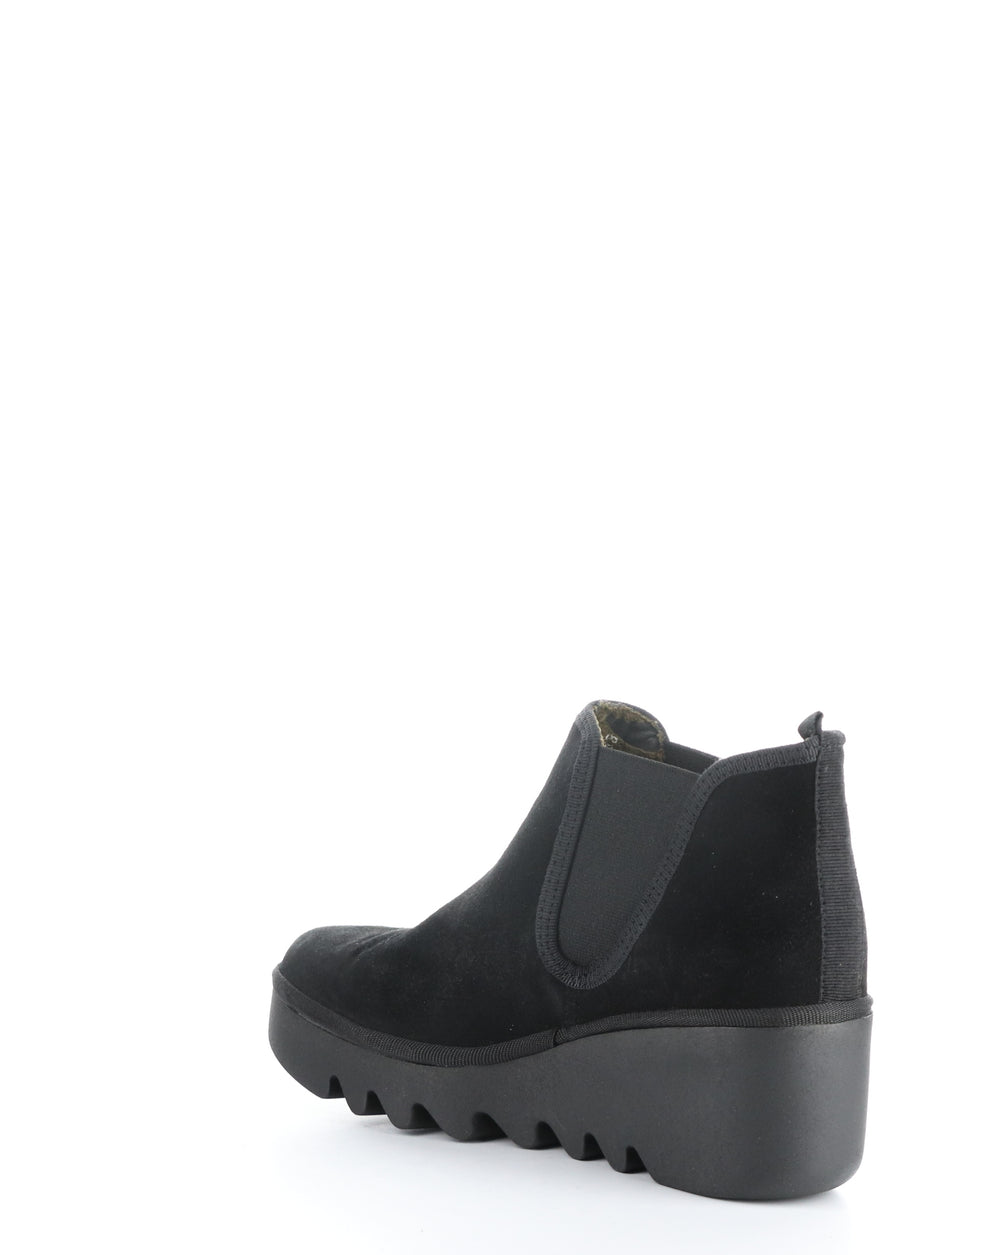 BYNE349FLY 019 BLACK Elasticated Boots